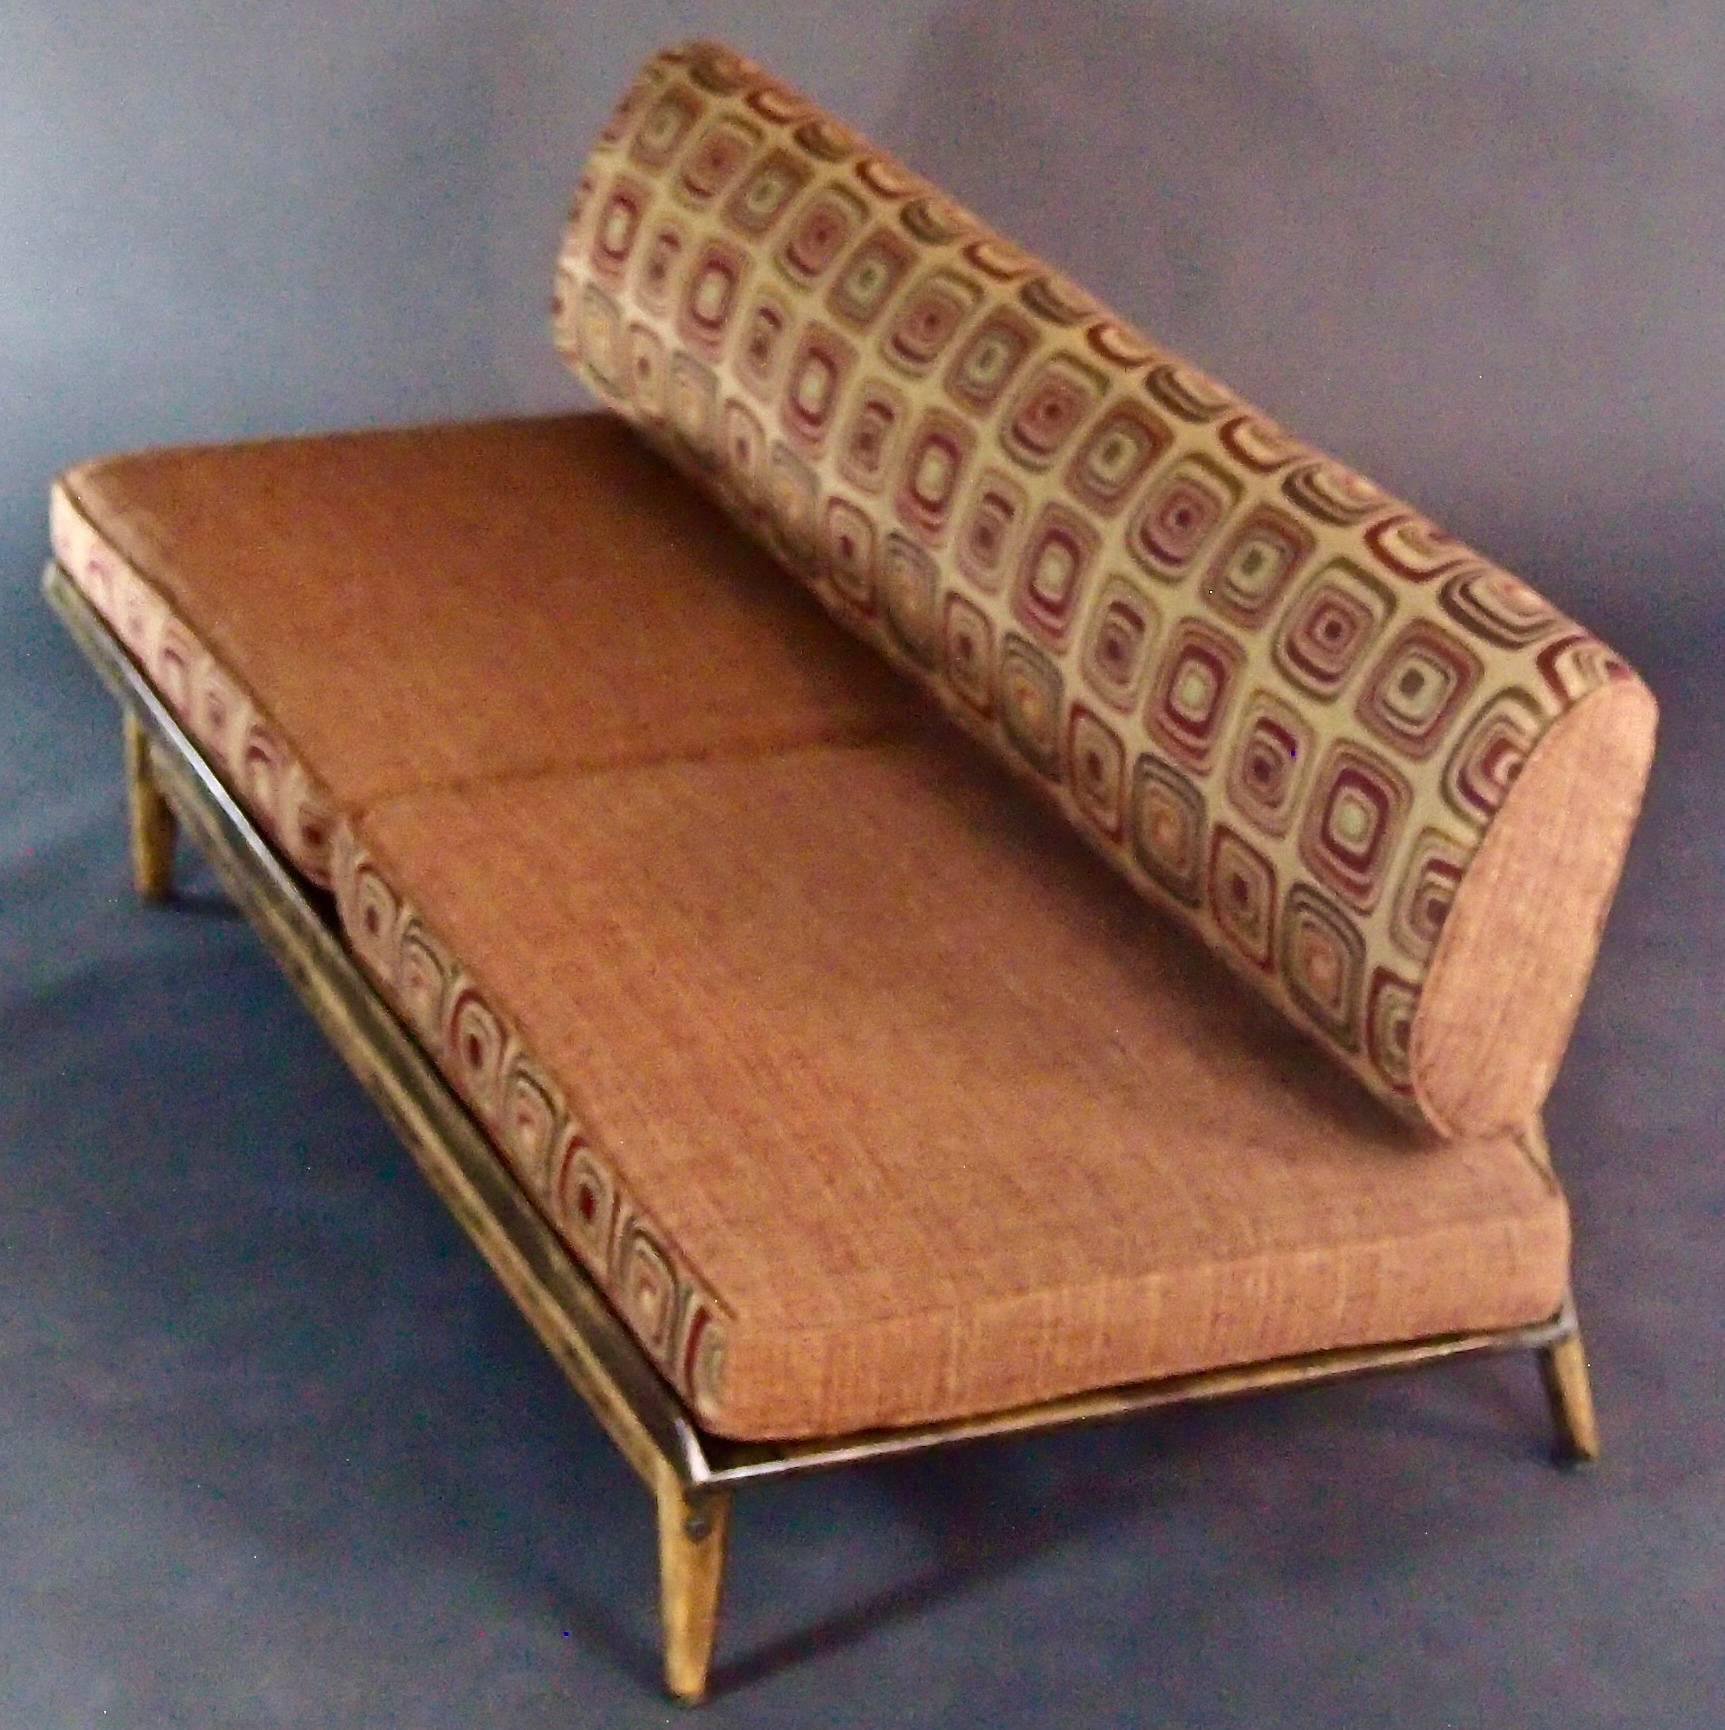 A generous slipper sofa with refinished wooden base and new vintage orange/rust tweed upholstery. The truly elegant shape is complemented by a retro graphic pattern. Collected in Palo Alto, CA in an original Mid-Century Modern housing development